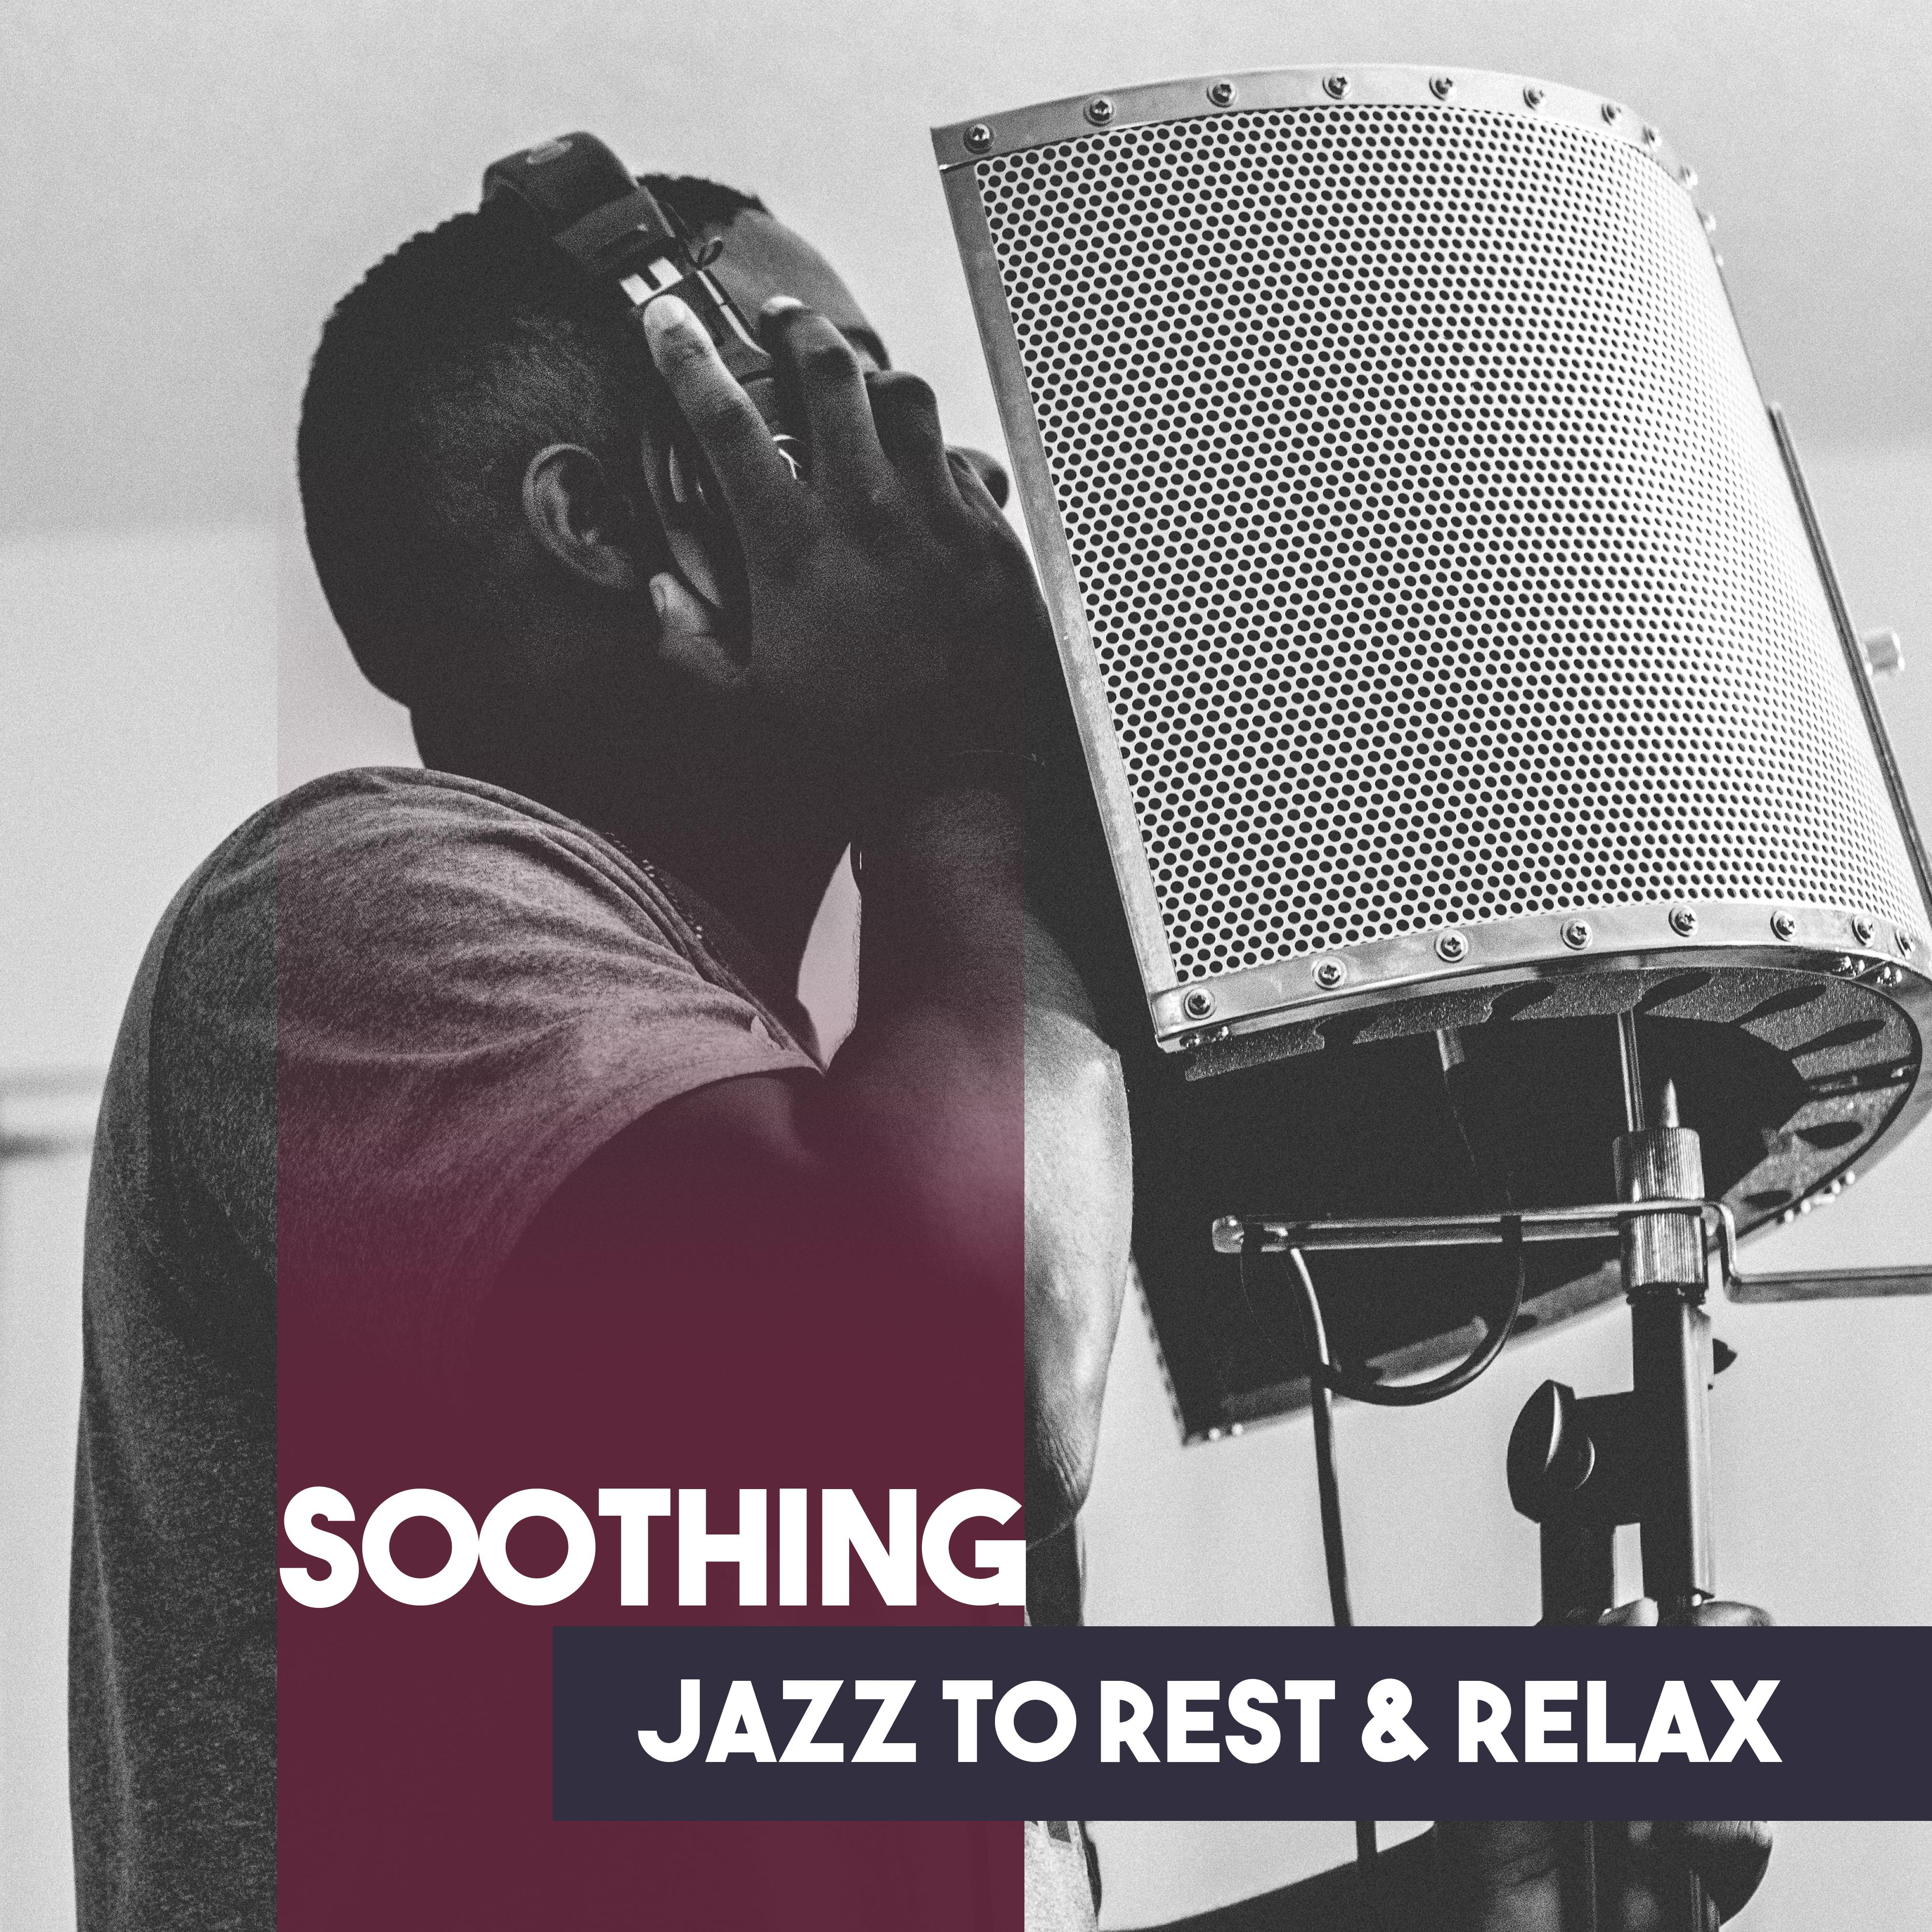 Soothing Jazz to Rest  Relax  Calm Down with Jazz, Piano for Relaxation, Easy Listening, Chilled Music